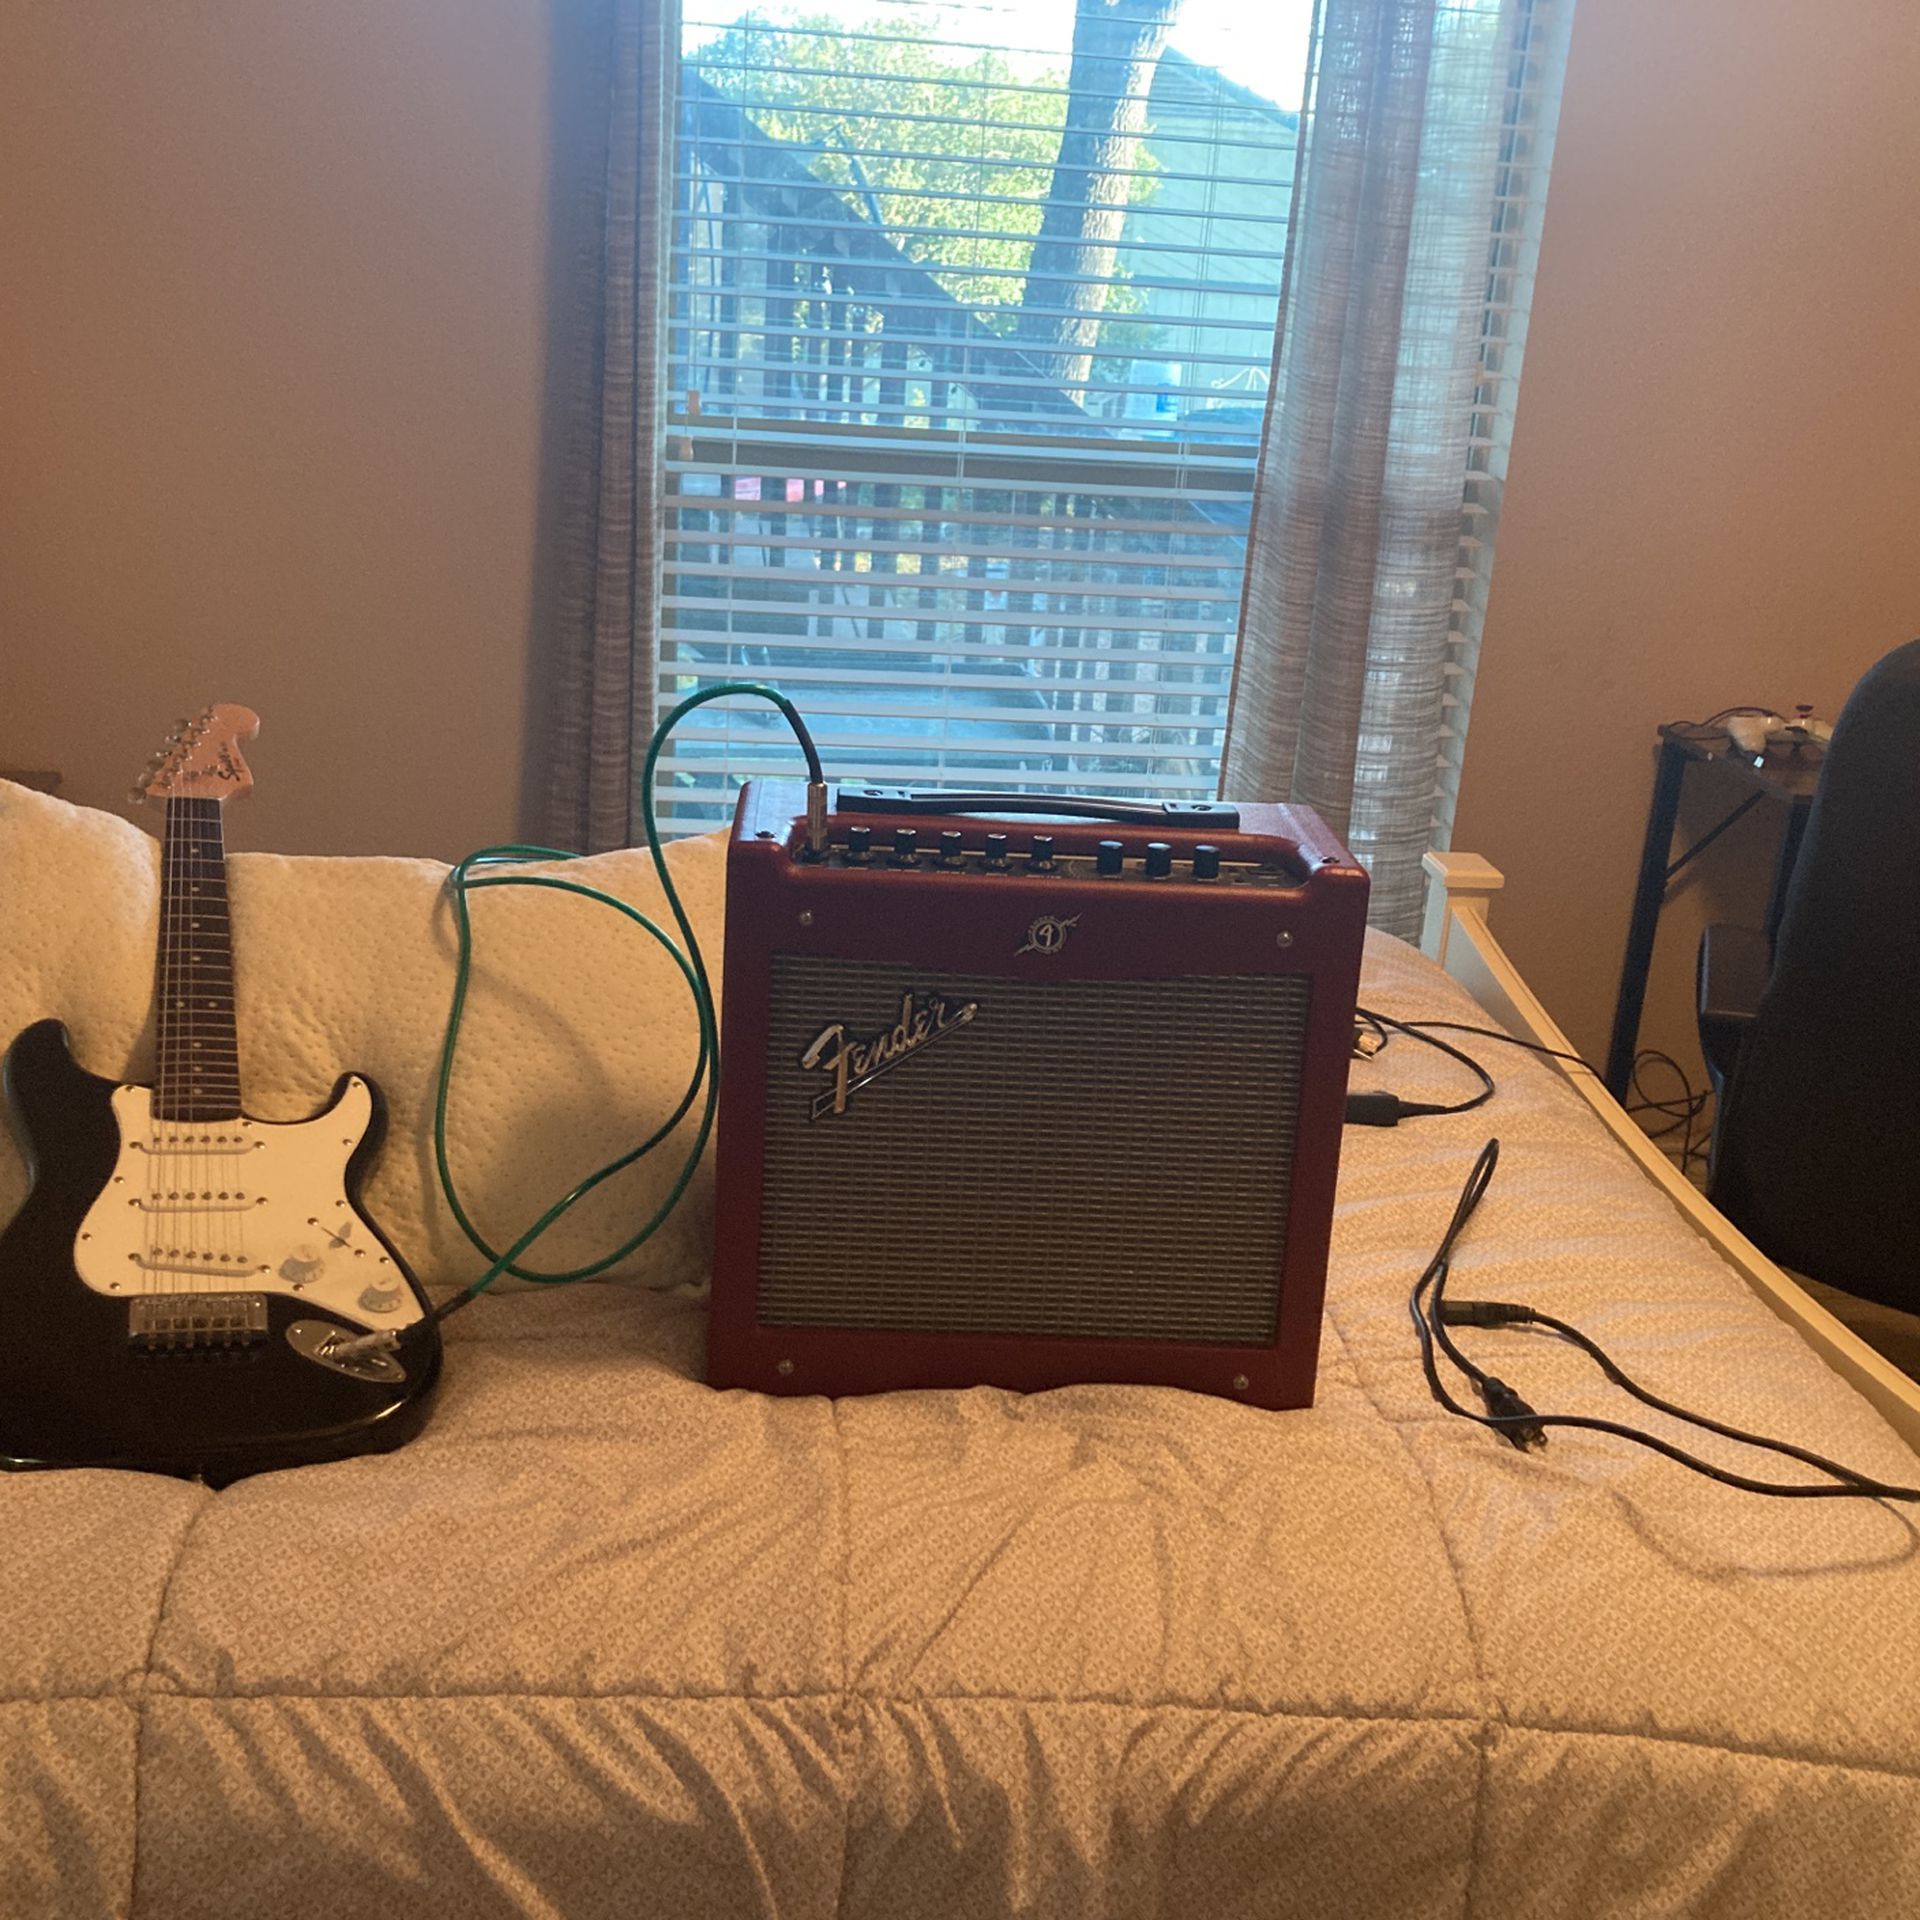 Electric guitar with amp and power cord